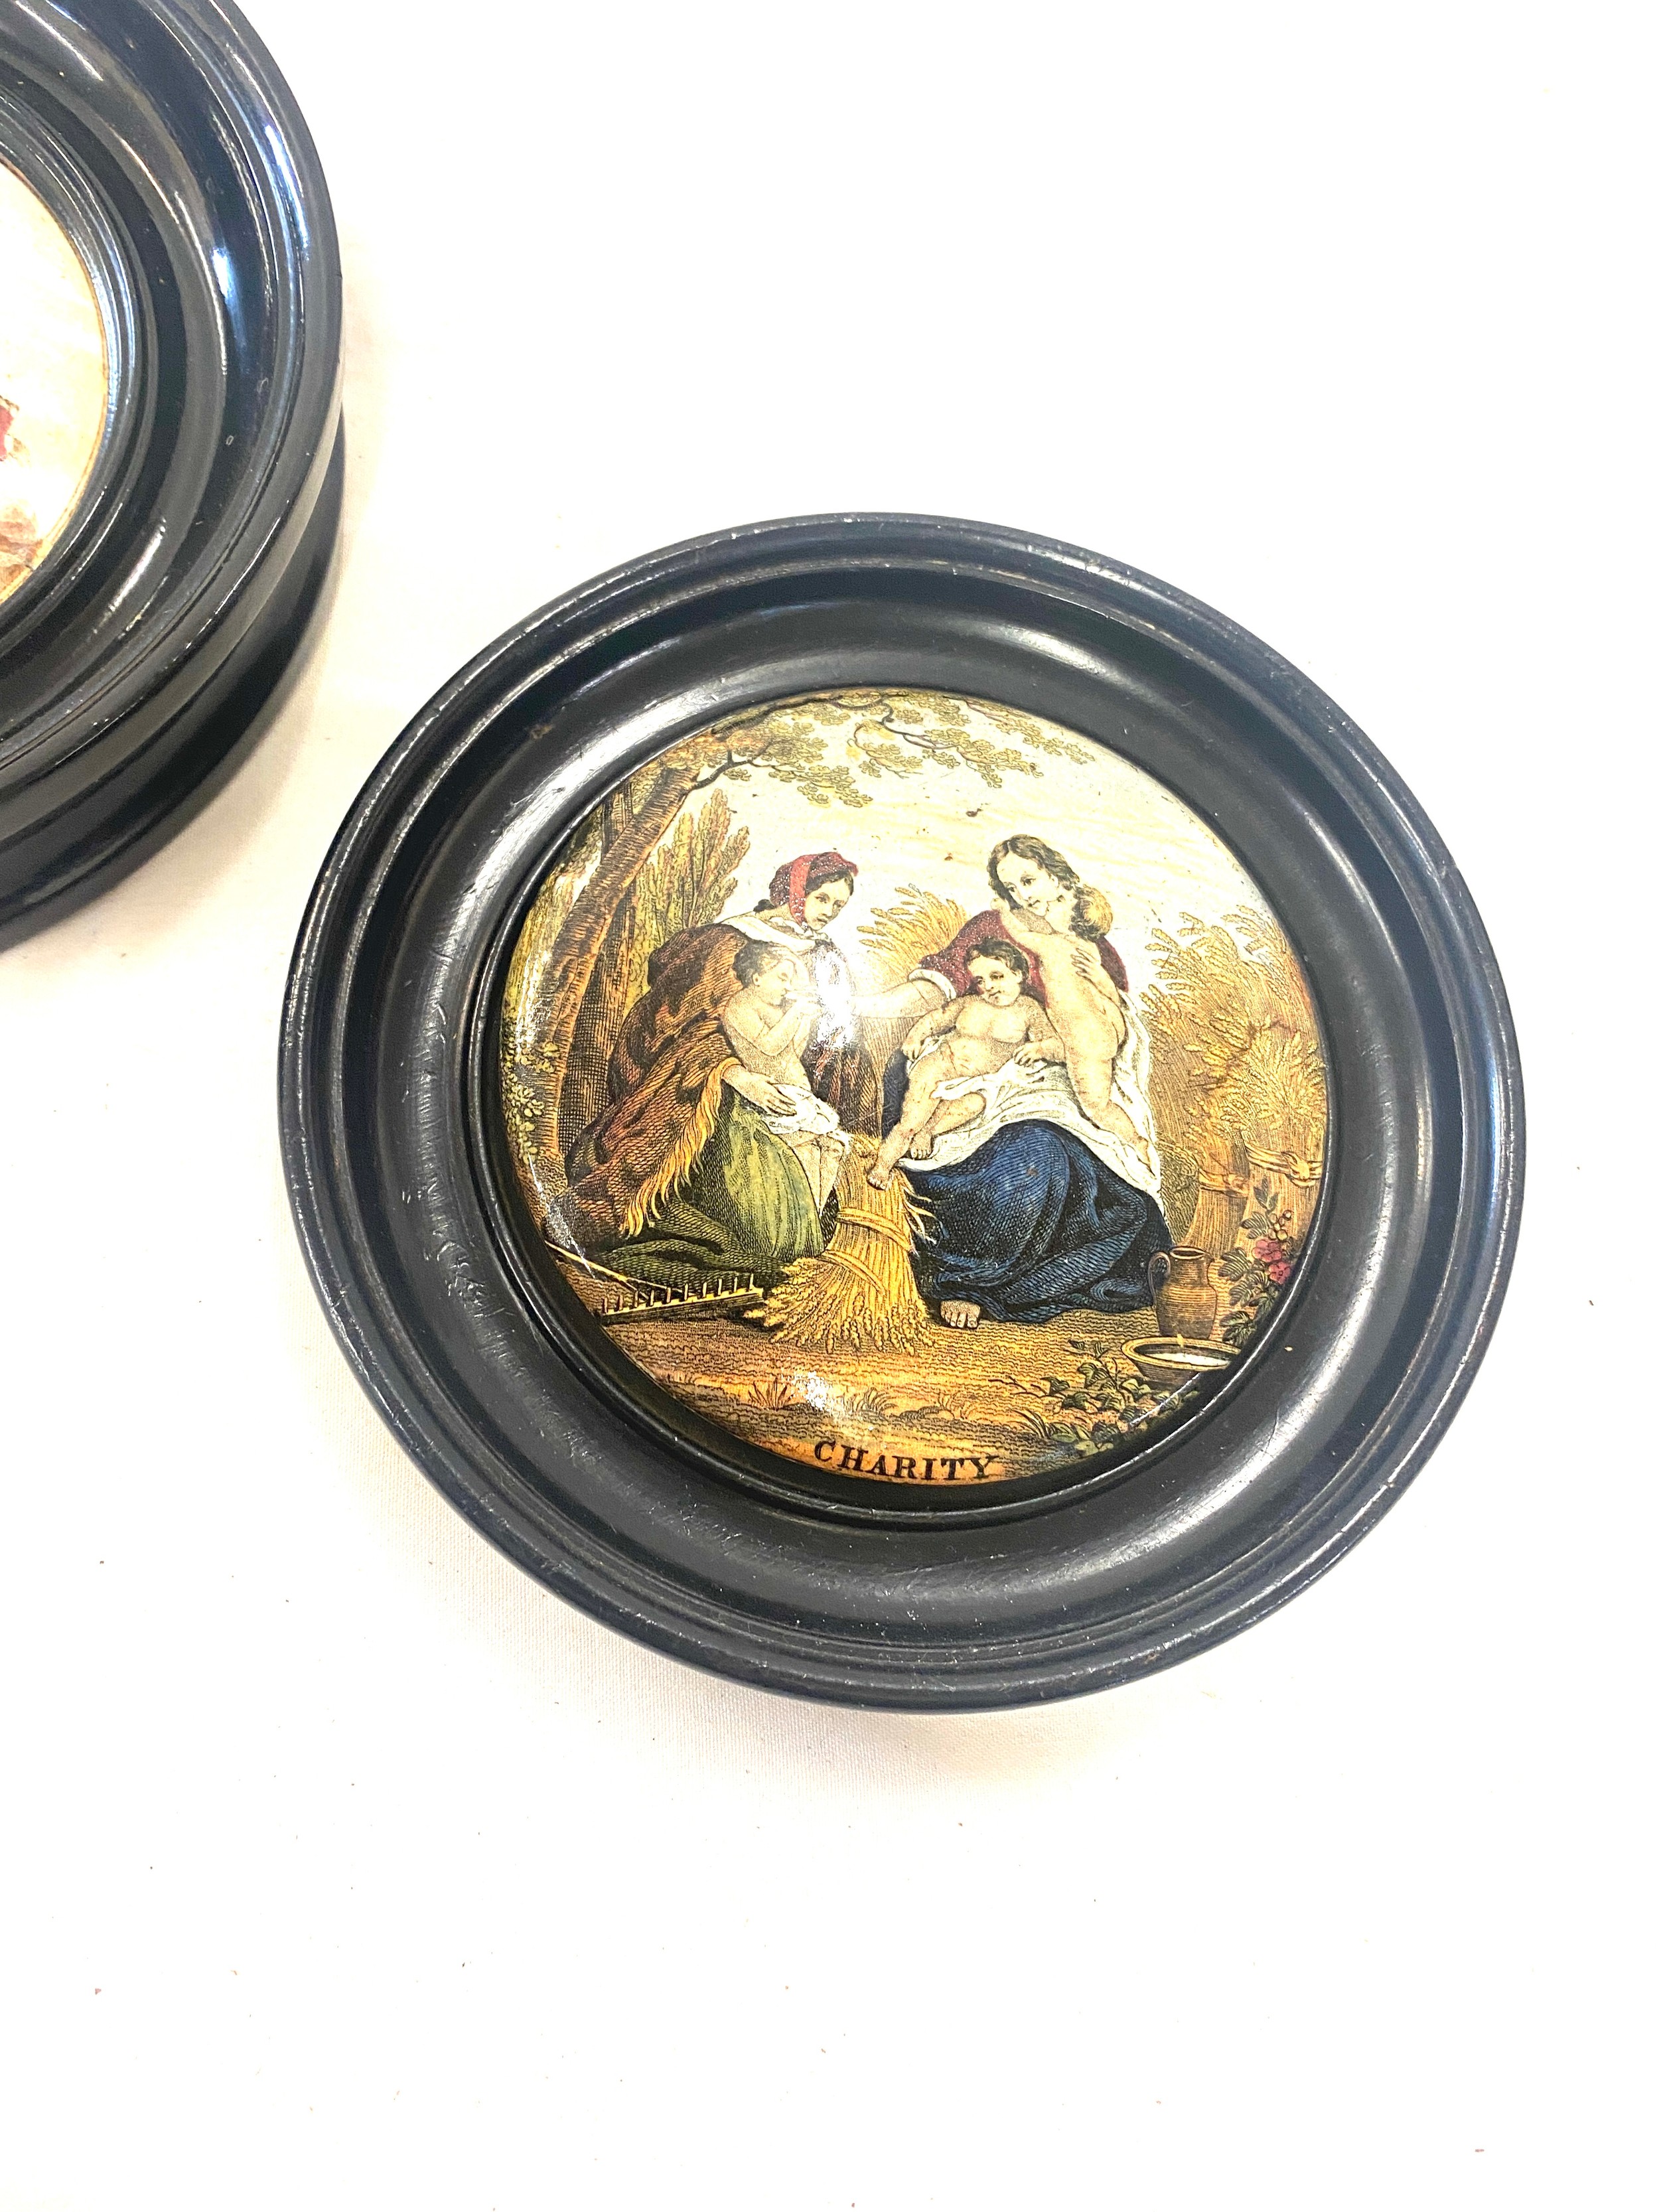 Two vintage framed pot lids includes i see you my boy and charity, largest measures approx 6.5 - Image 3 of 4